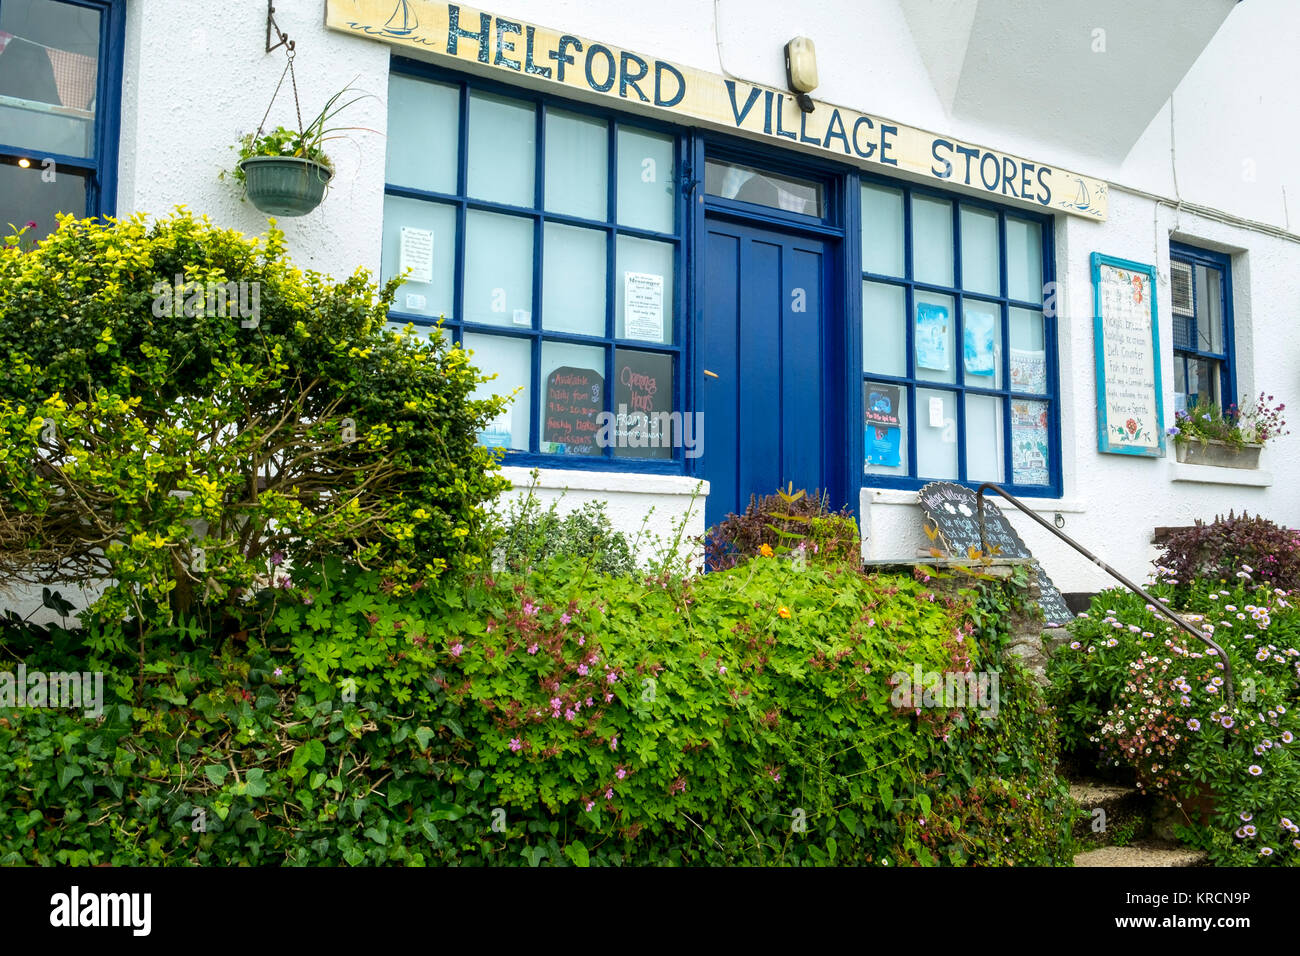 Helford Village Stores in old fashioned Helford village on the Helford Estuary in rural Cornwall, UK. Stock Photo